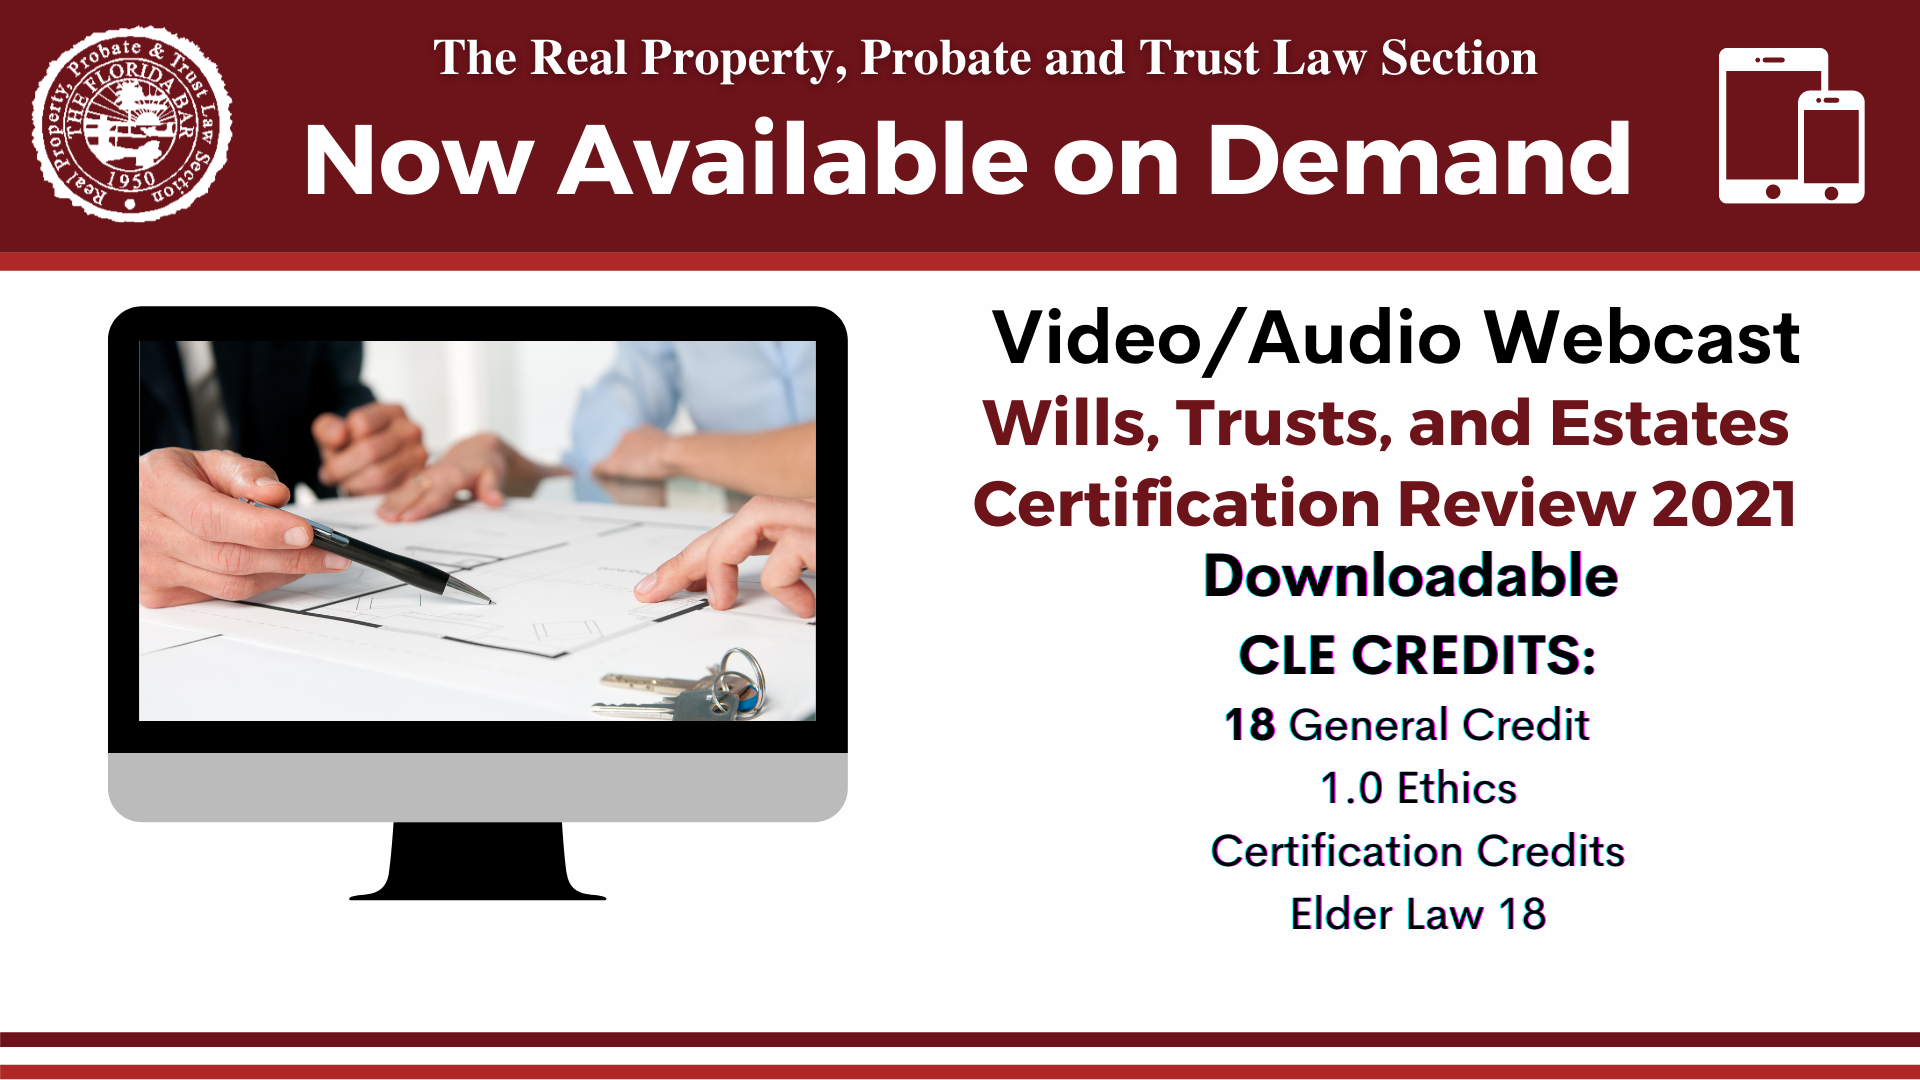 Wills, Trusts, and Estates Certification Review Available On Demand